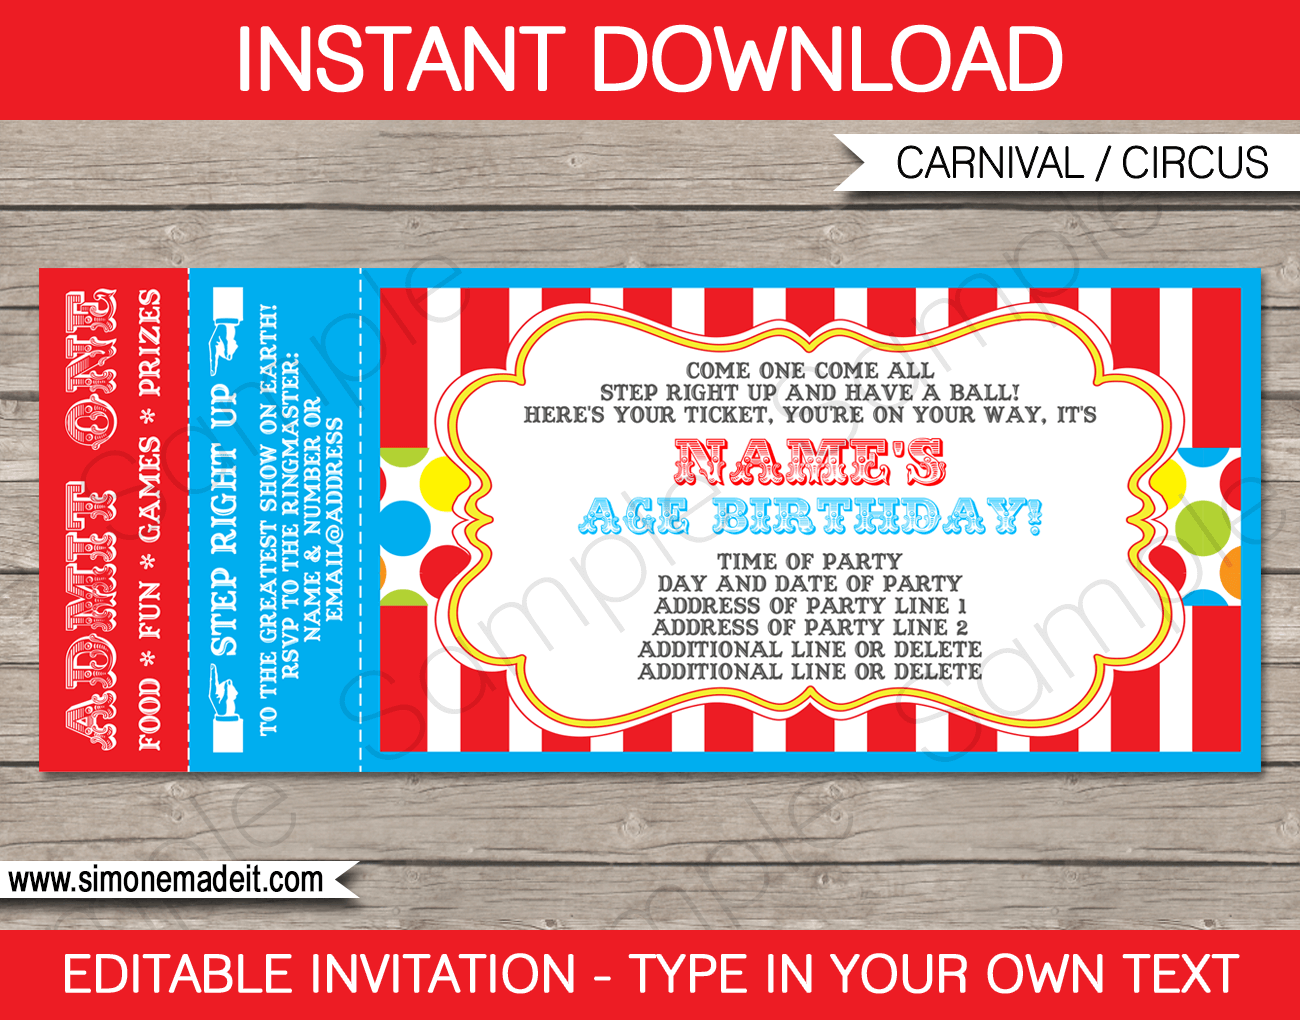 https://www.simonemadeit.com/wp-content/uploads/edd/2016/09/Carnival-Ticket-Invitation-Template-Circus-Editable-and-printable.png